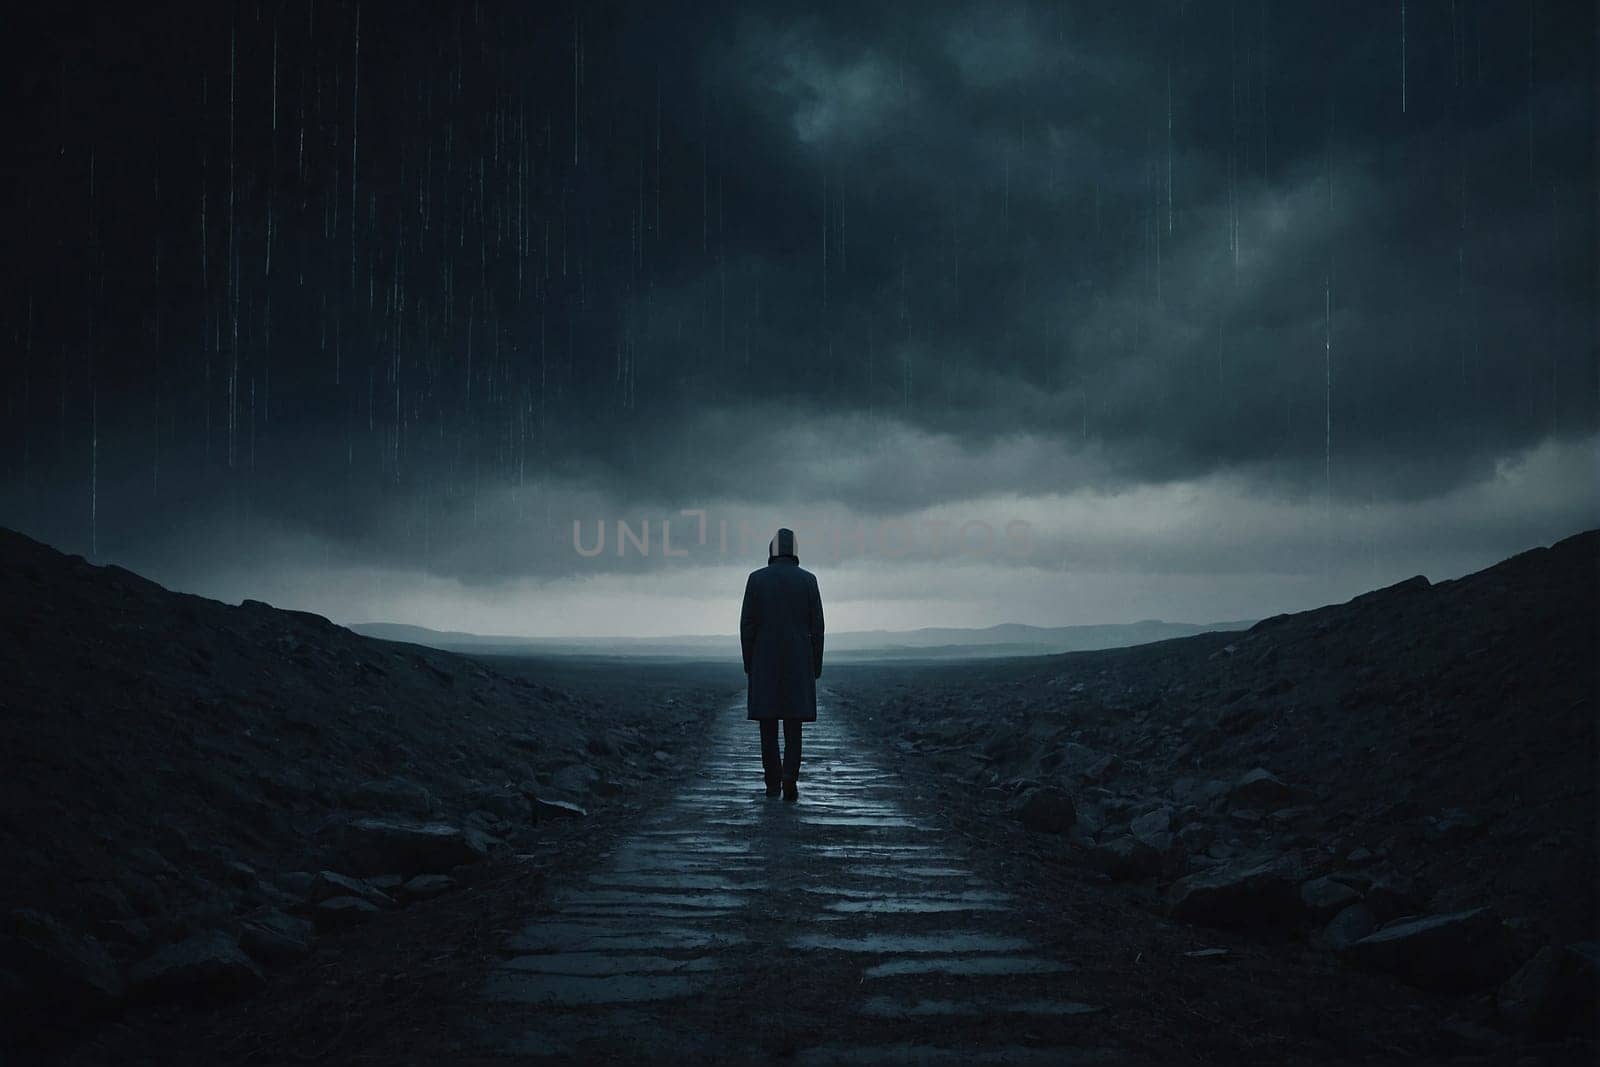 A person stands alone in the middle of a dimly lit road at night, surrounded by darkness.